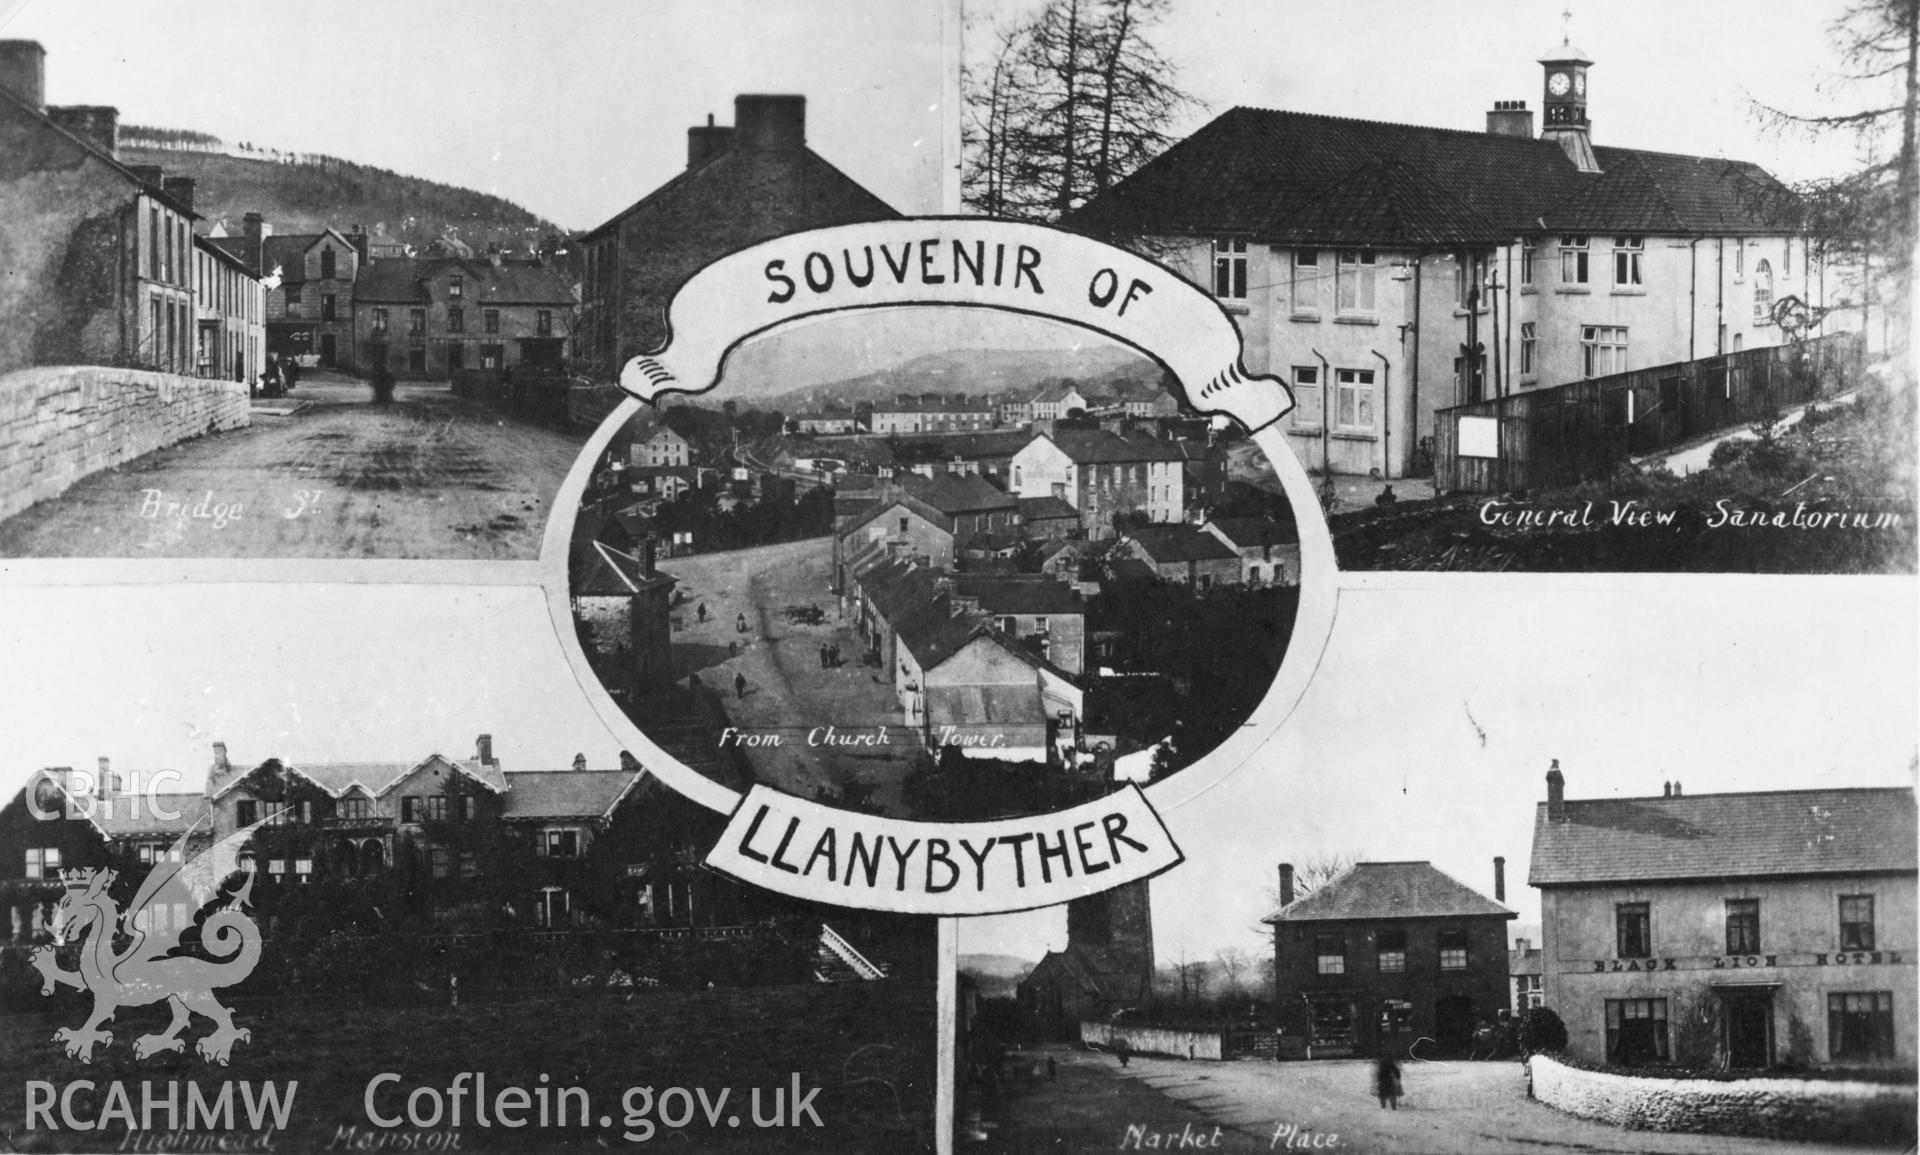 Copy of b/w postcard of Llanybyther, showing Bridge Street, a general view, Sanatorium and Market Place, copied from original loaned by Thomas Lloyd. Copy negative held.